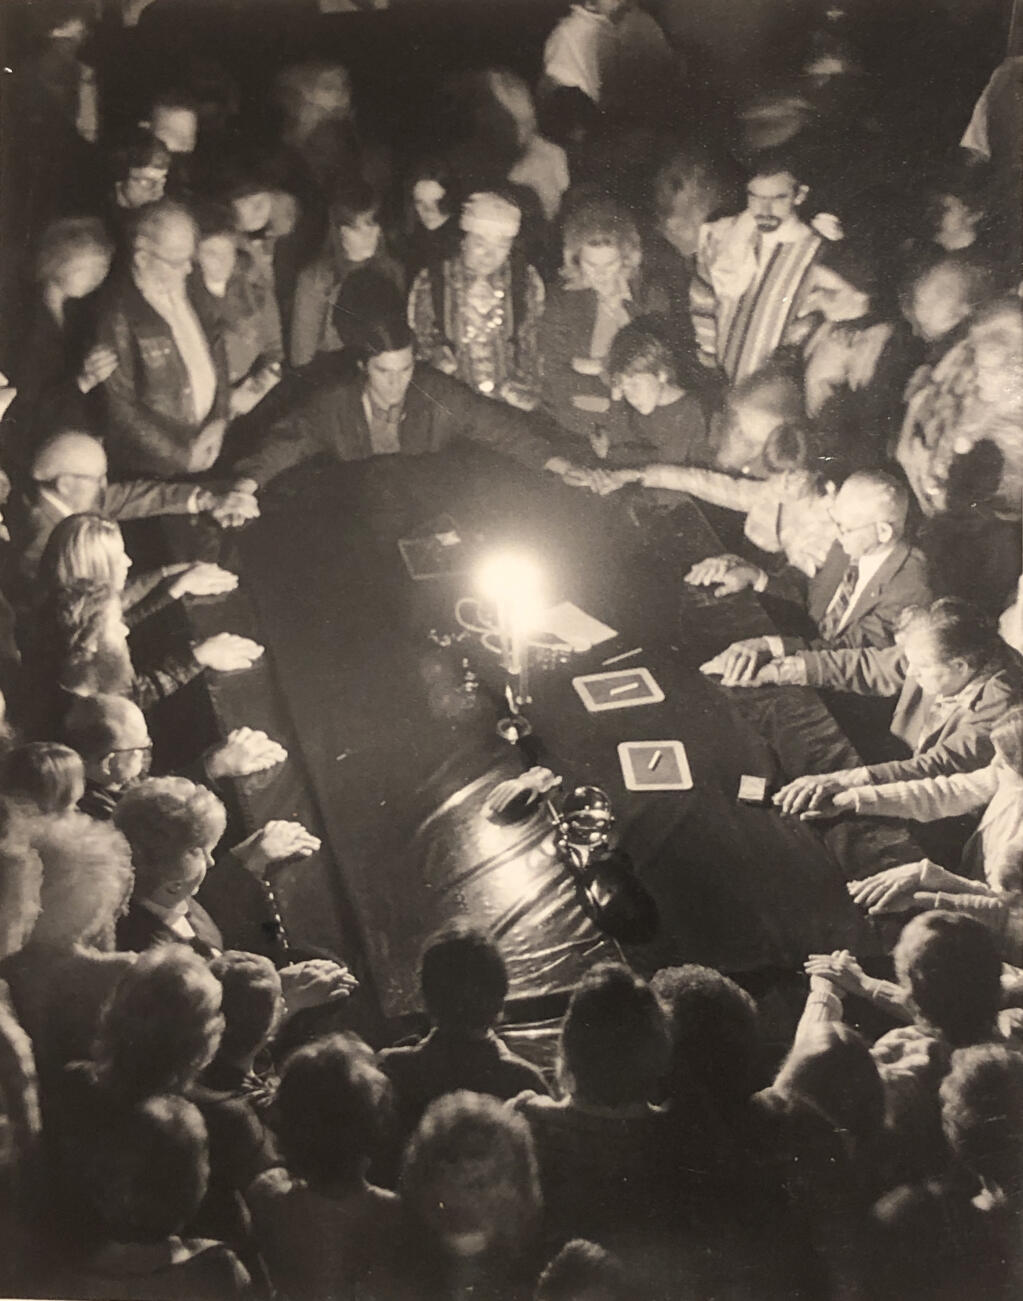 An early undated shot of the Halloween Houdini séance, with Bill Soberanes seated at the table on the right side of the photo. A deck of cards is on the table next to his left hand. (COURTESY OF THE PETALUMA HISTORICAL LIBRARY AND MUSEUM)